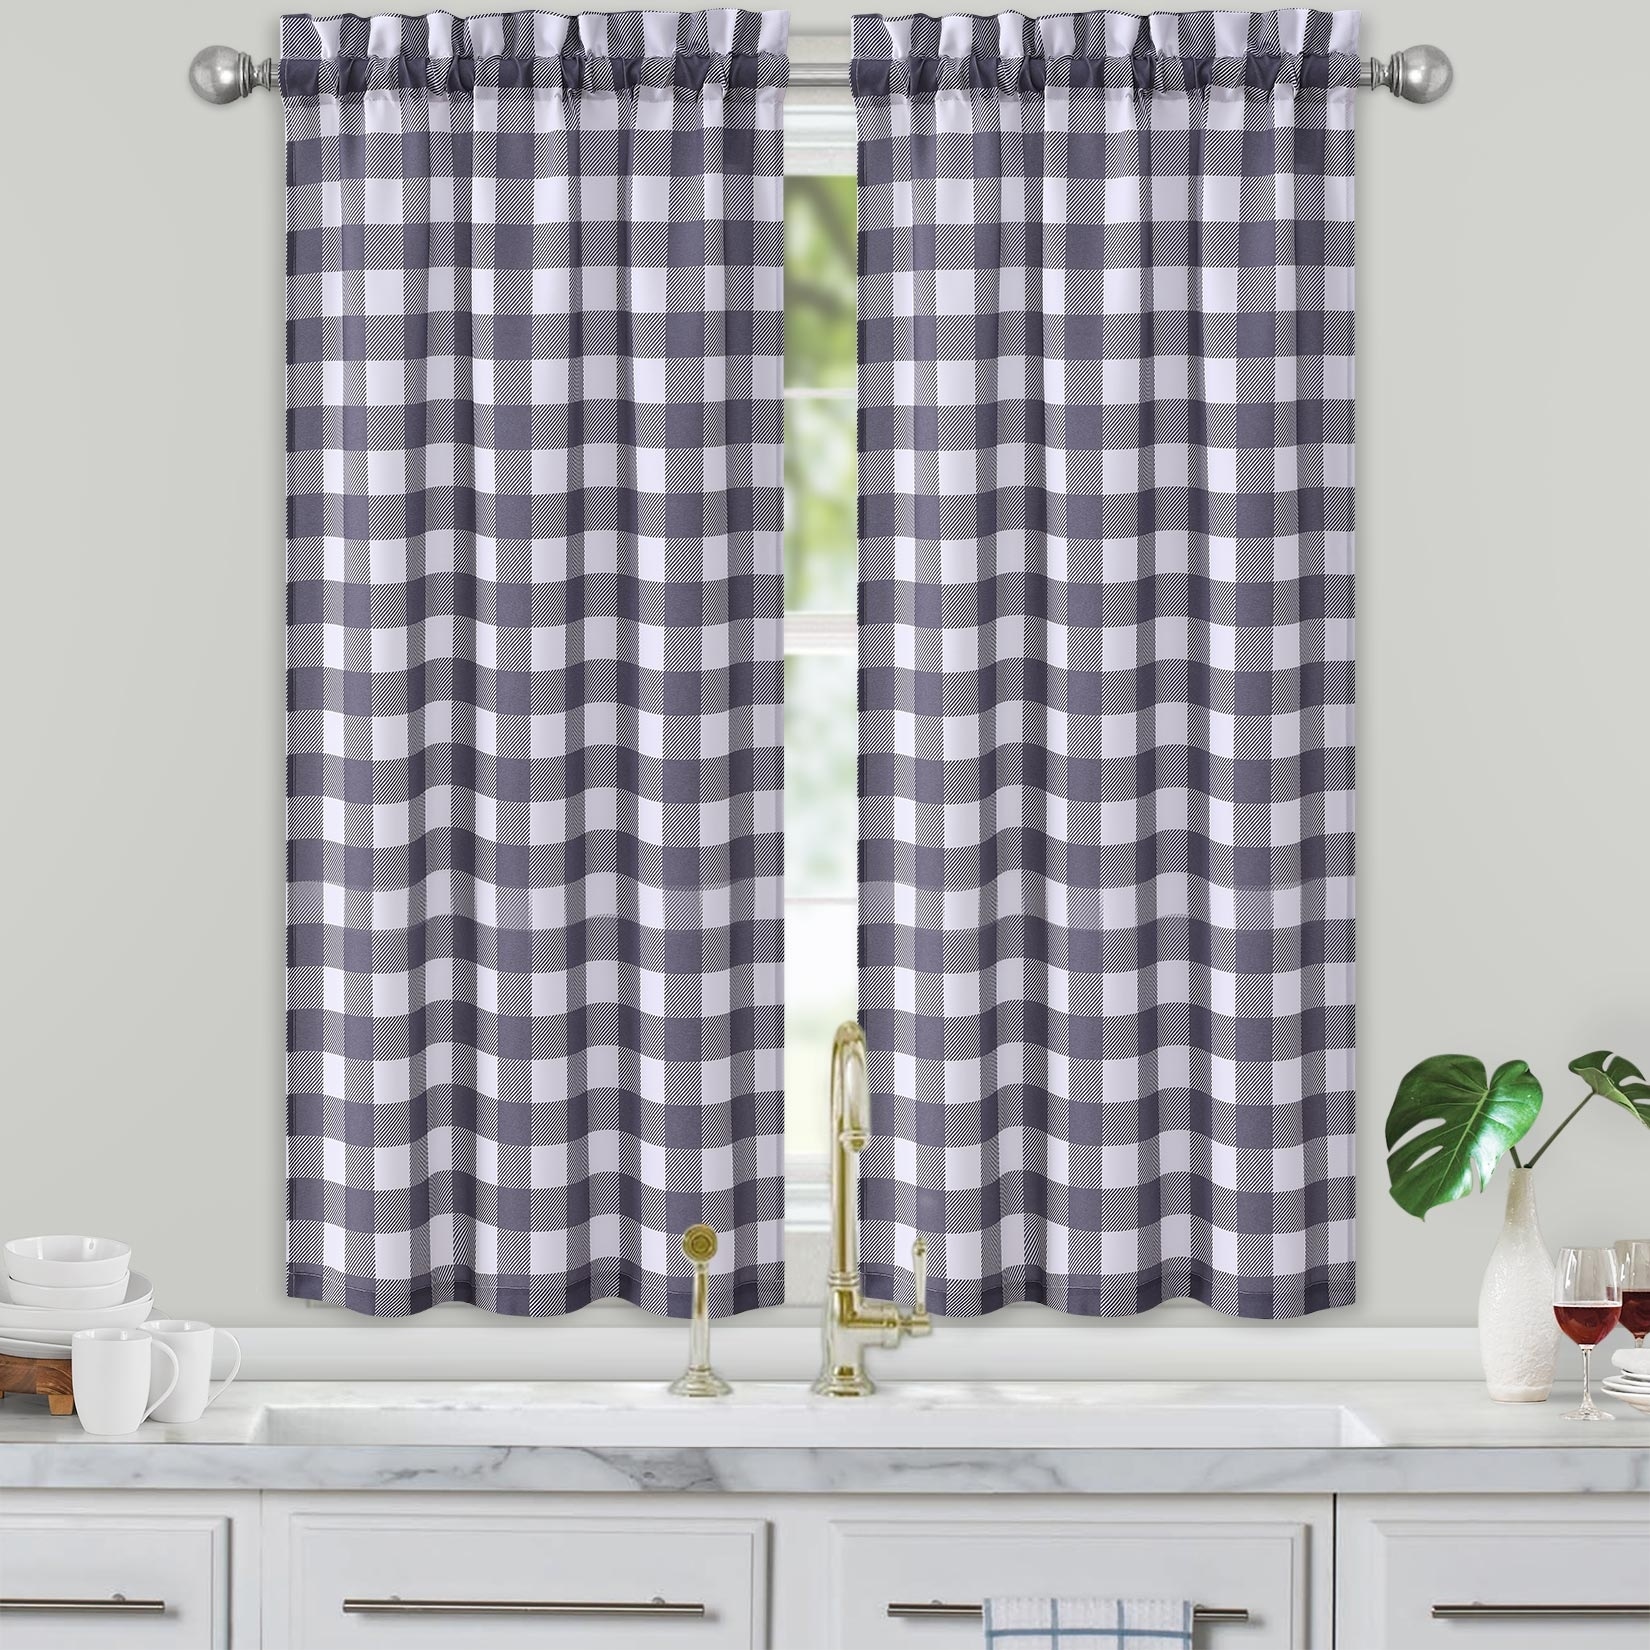 https://ak1.ostkcdn.com/images/products/is/images/direct/ed70b3415cbc5b514f09fd572a97eff97e9fe4cc/GlowSol-Tier-Curtains-Buffalo-Check-Plaid-Gingham-Curtain-Rod-Pocket-Curtains-for-Cafe-Farmhouse-Bathroom-Kitchen%2C-2-Panels.jpg